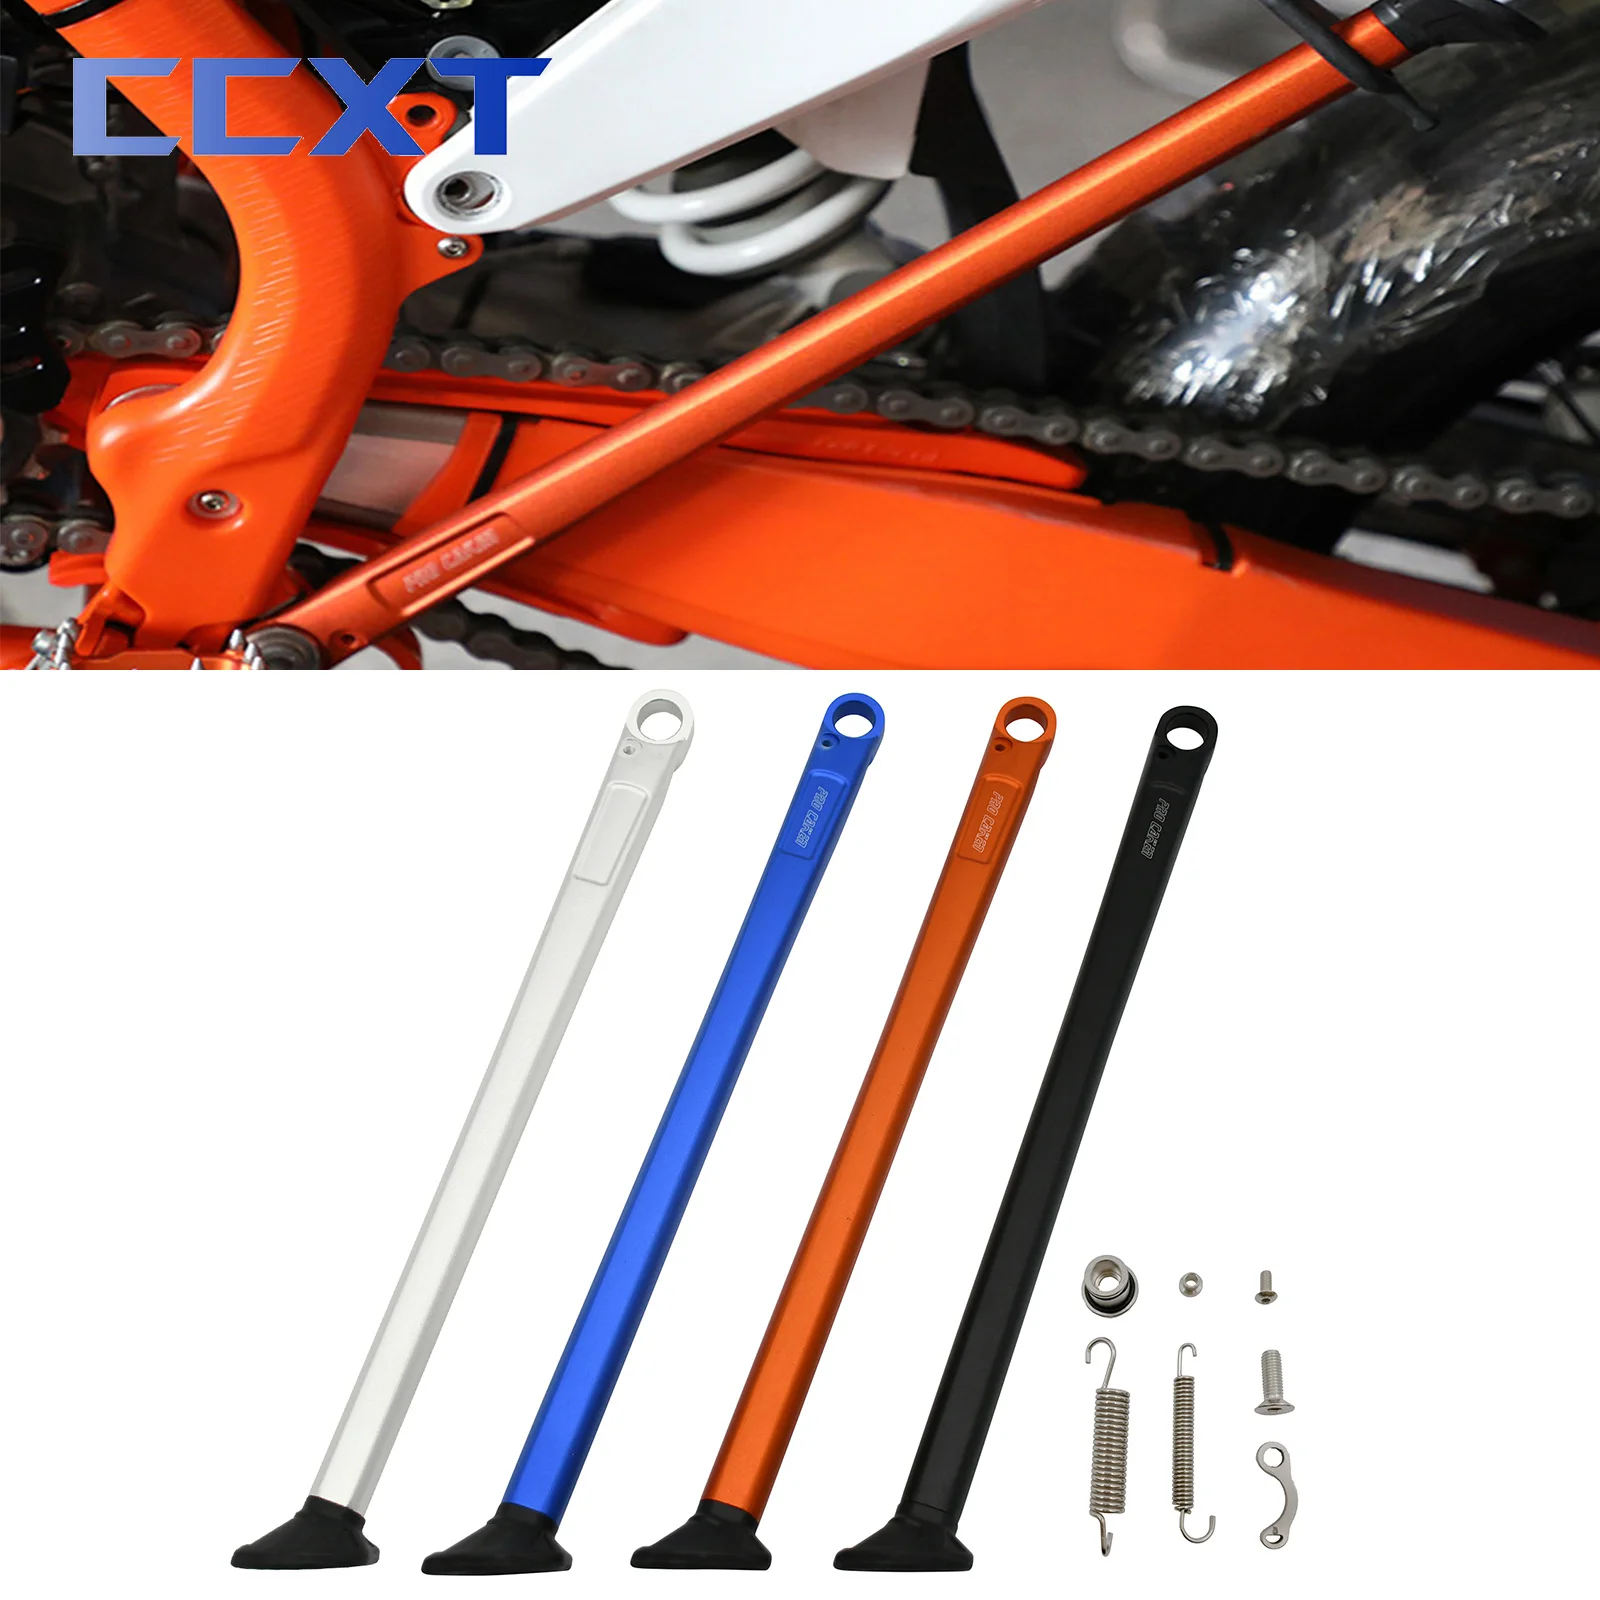 

Kickstand Side Stand and Spring For KTM EXC250 EXC450 SXF250 SXF450 XCF250 XCF450 SX SXF XC XCF XCW EXC EXCF 2008-2014 2015 2016